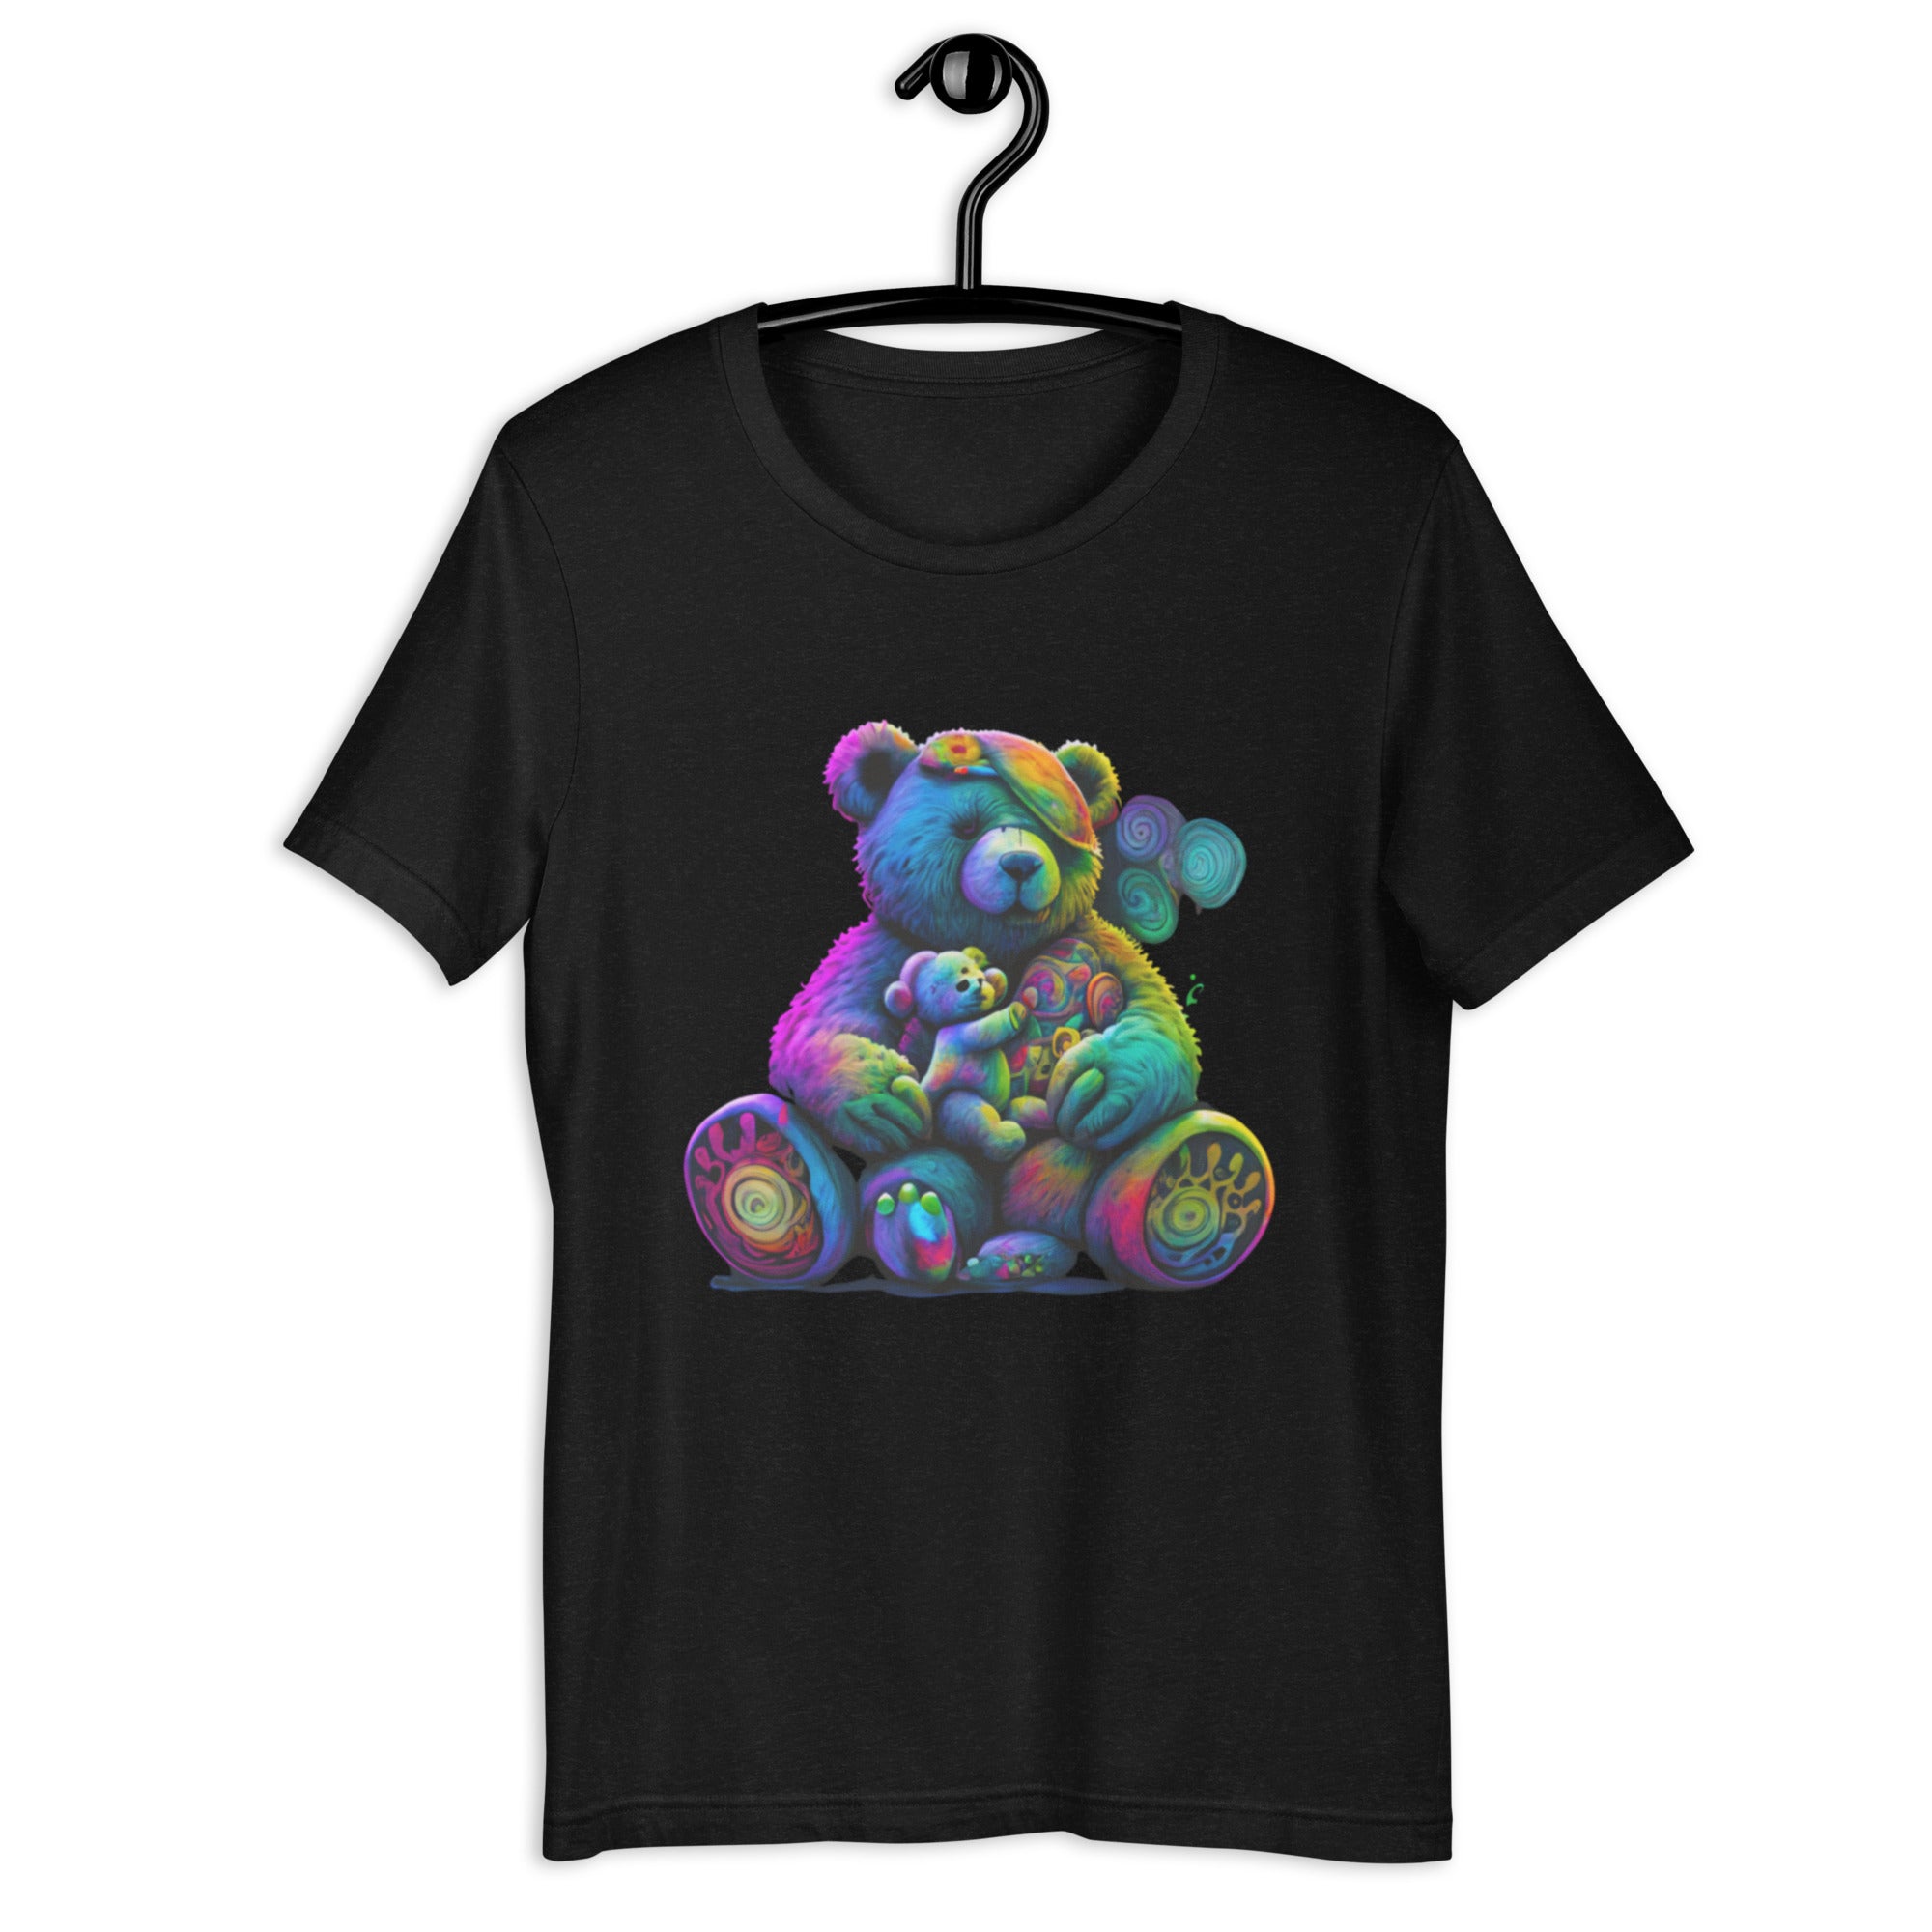 Stoned Bears Clothing collection: the Daddy Bear and Baby Bear t-shirt. 🐻❤️👨‍👦